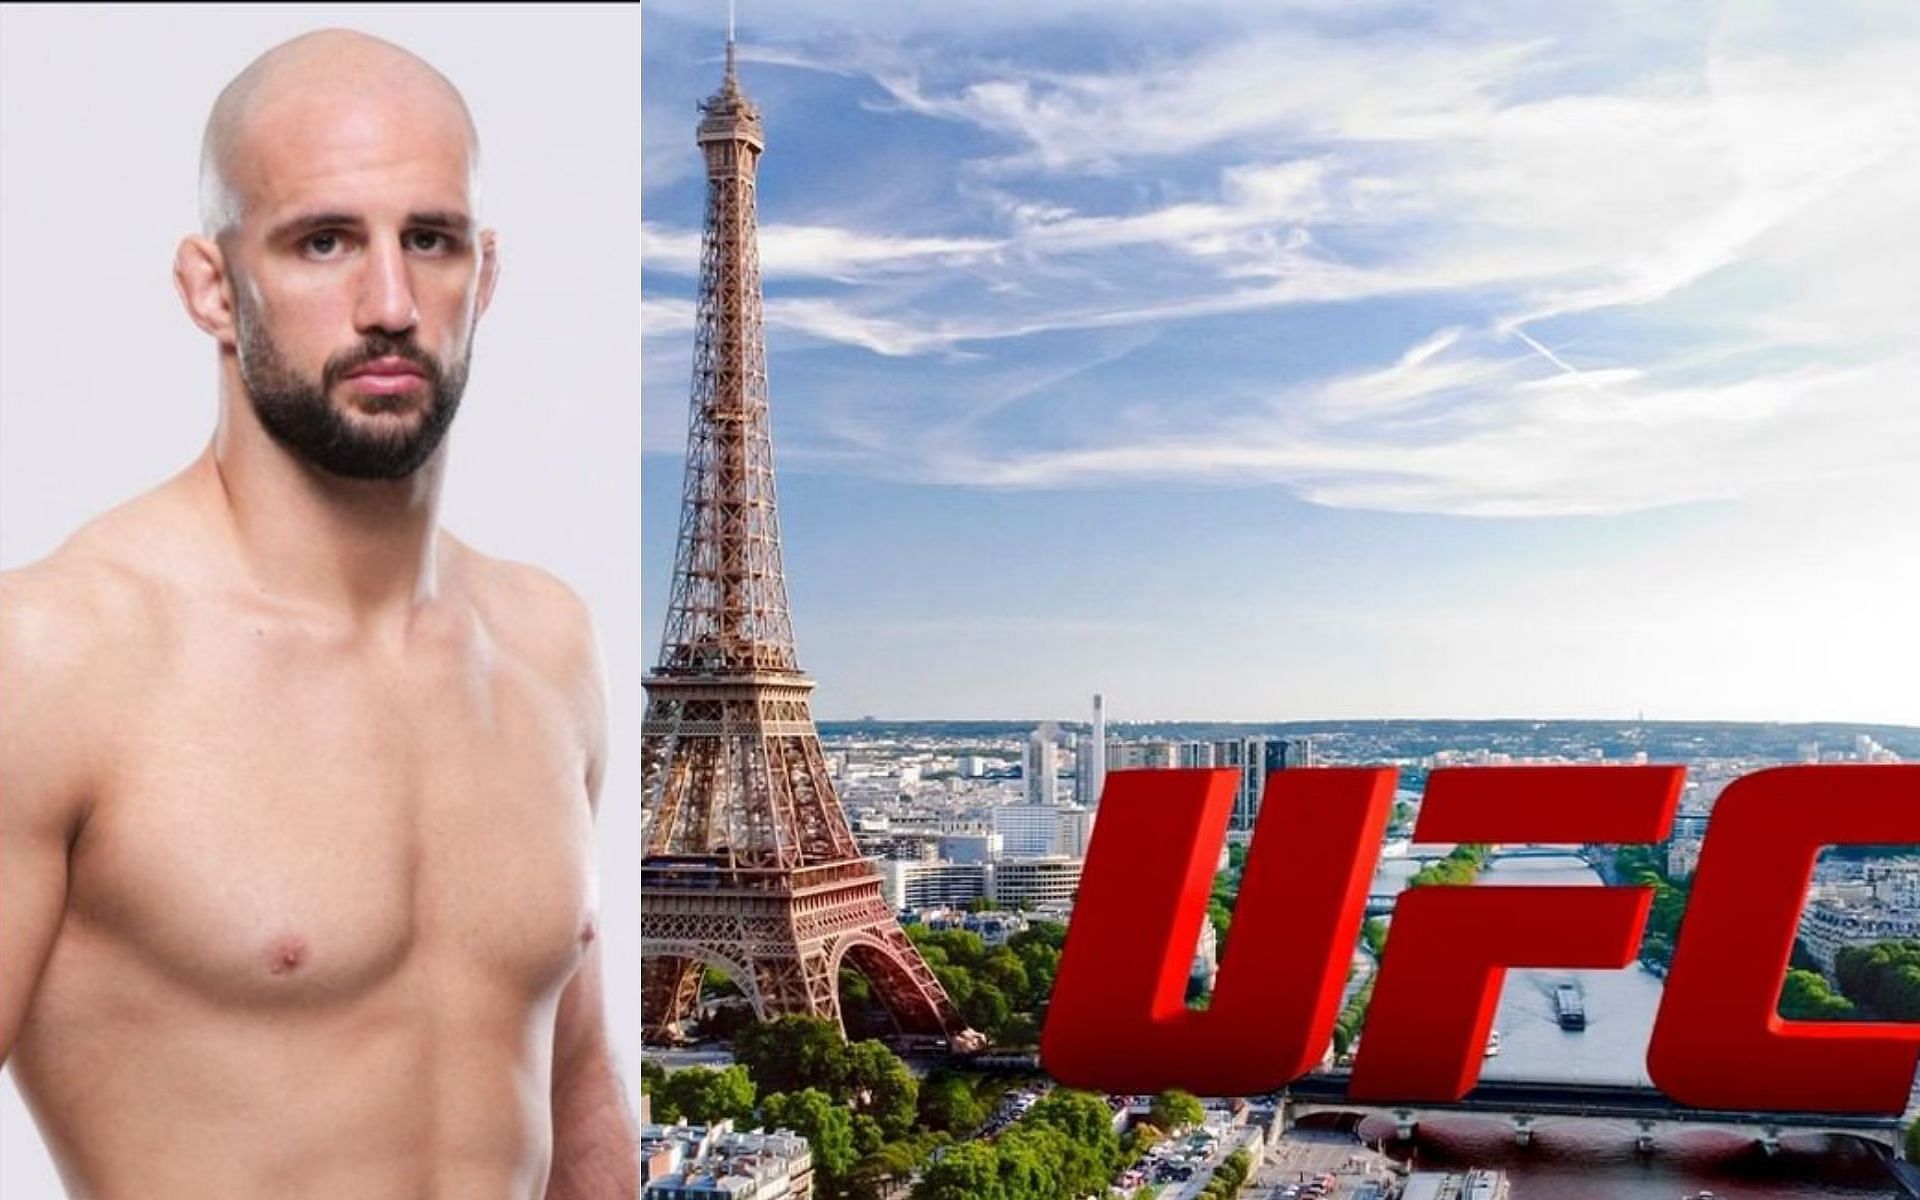 Volkan Oezdemir will compete at the UFC Paris event [Image credits: @BigMarcel24 on Twitter and @ufcfra on Instagram]